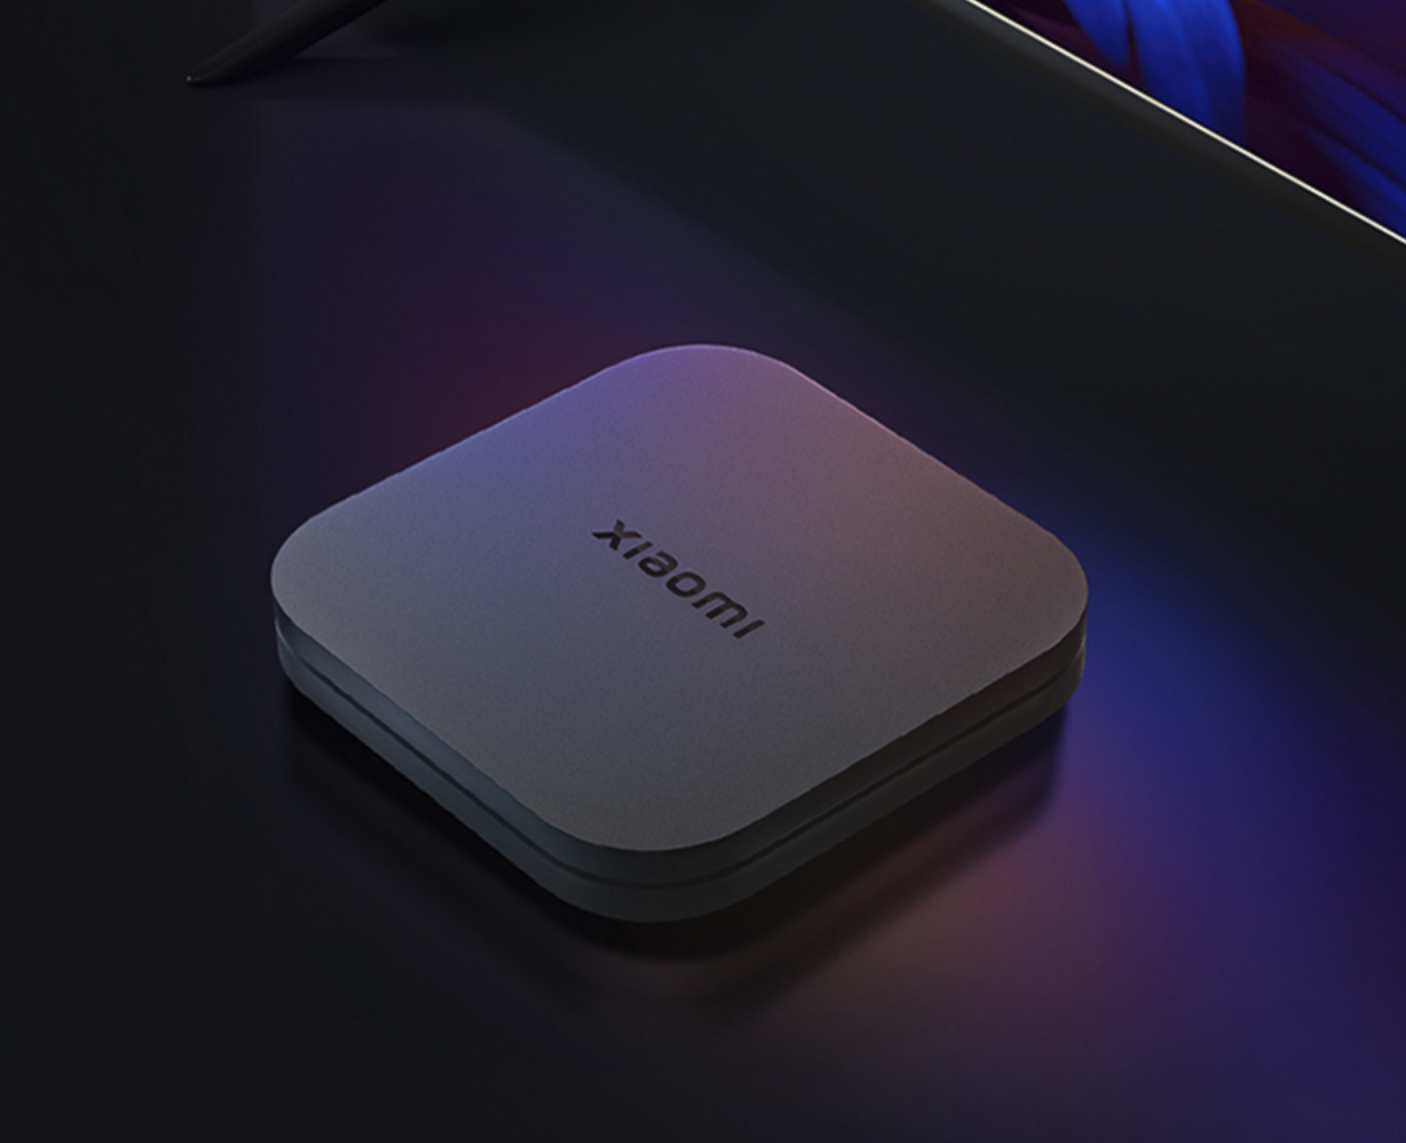 Xiaomi Mi Box 4S MAX presented with HDMI 2.1 connectivity and an